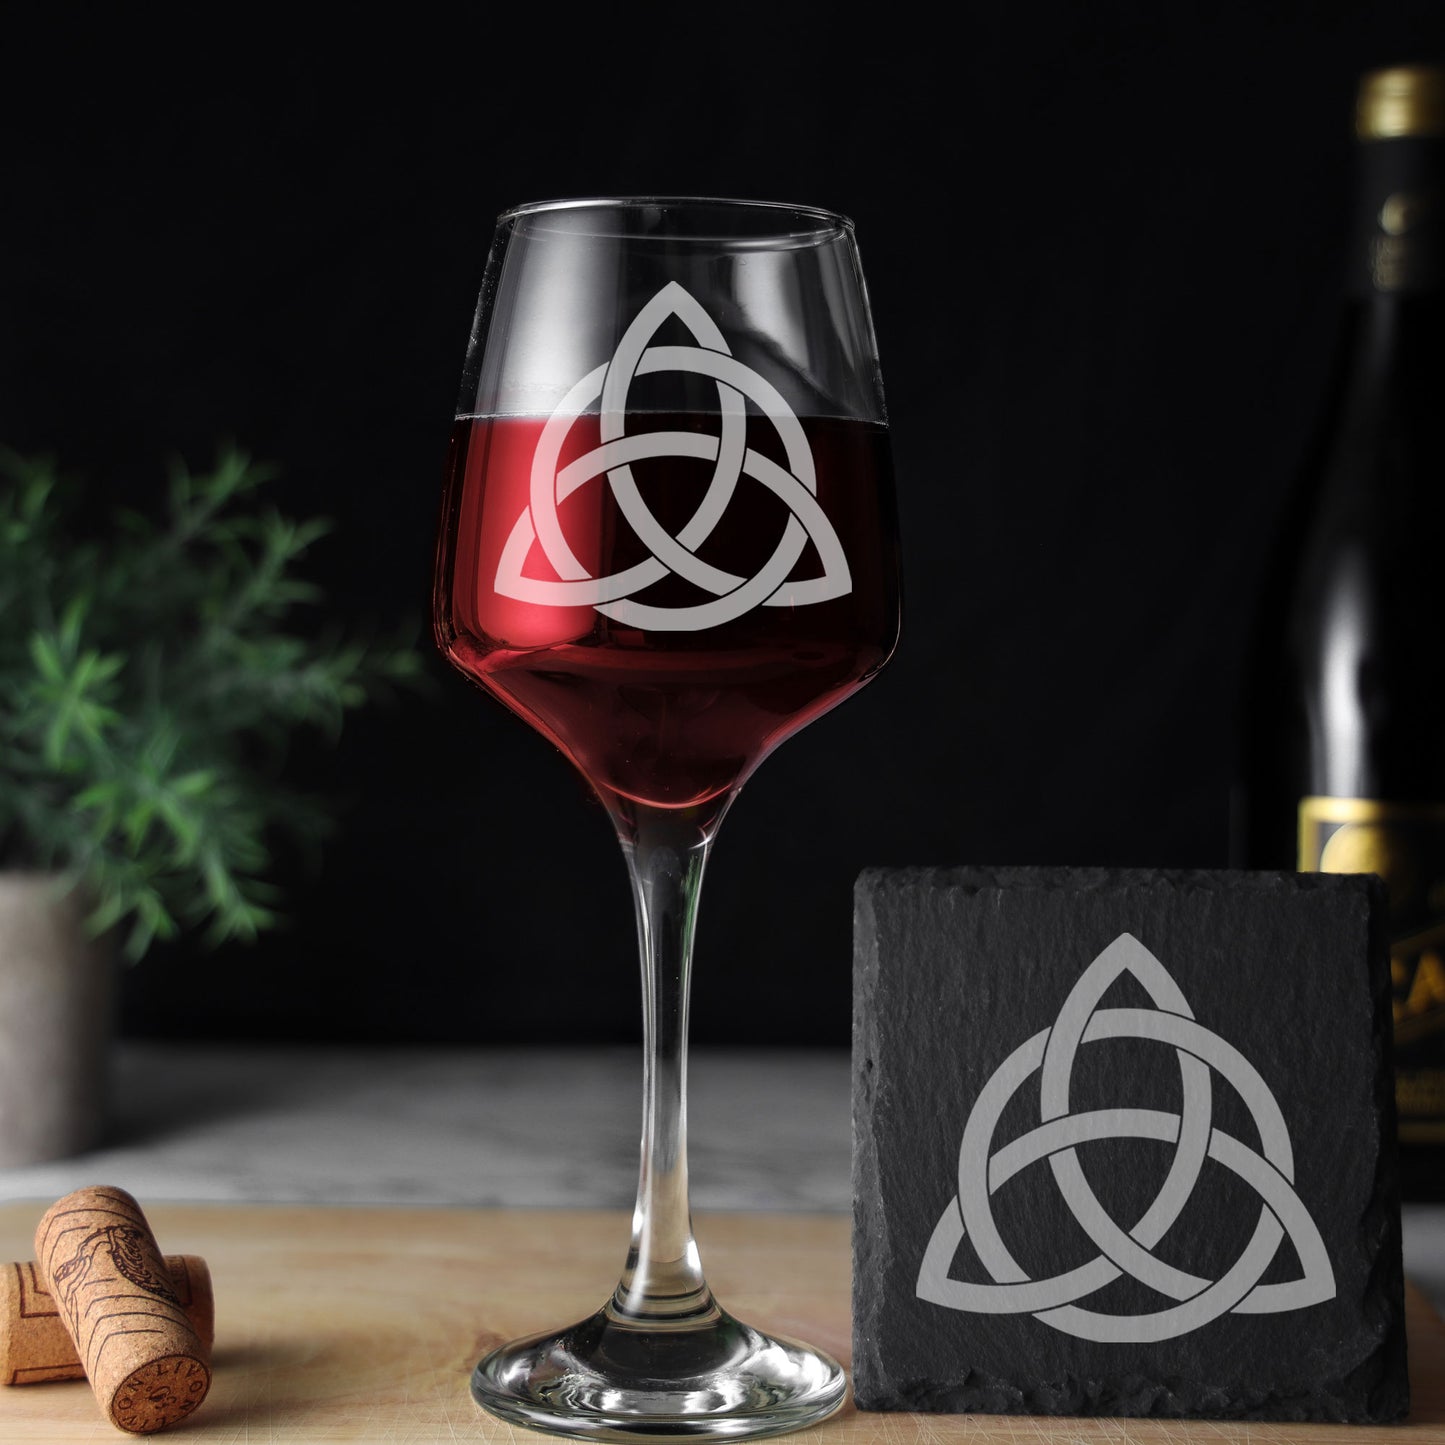 Celtic Knot Irish Engraved Wine Glass and/or Coaster Set  - Always Looking Good - Glass & Square Coaster Set  